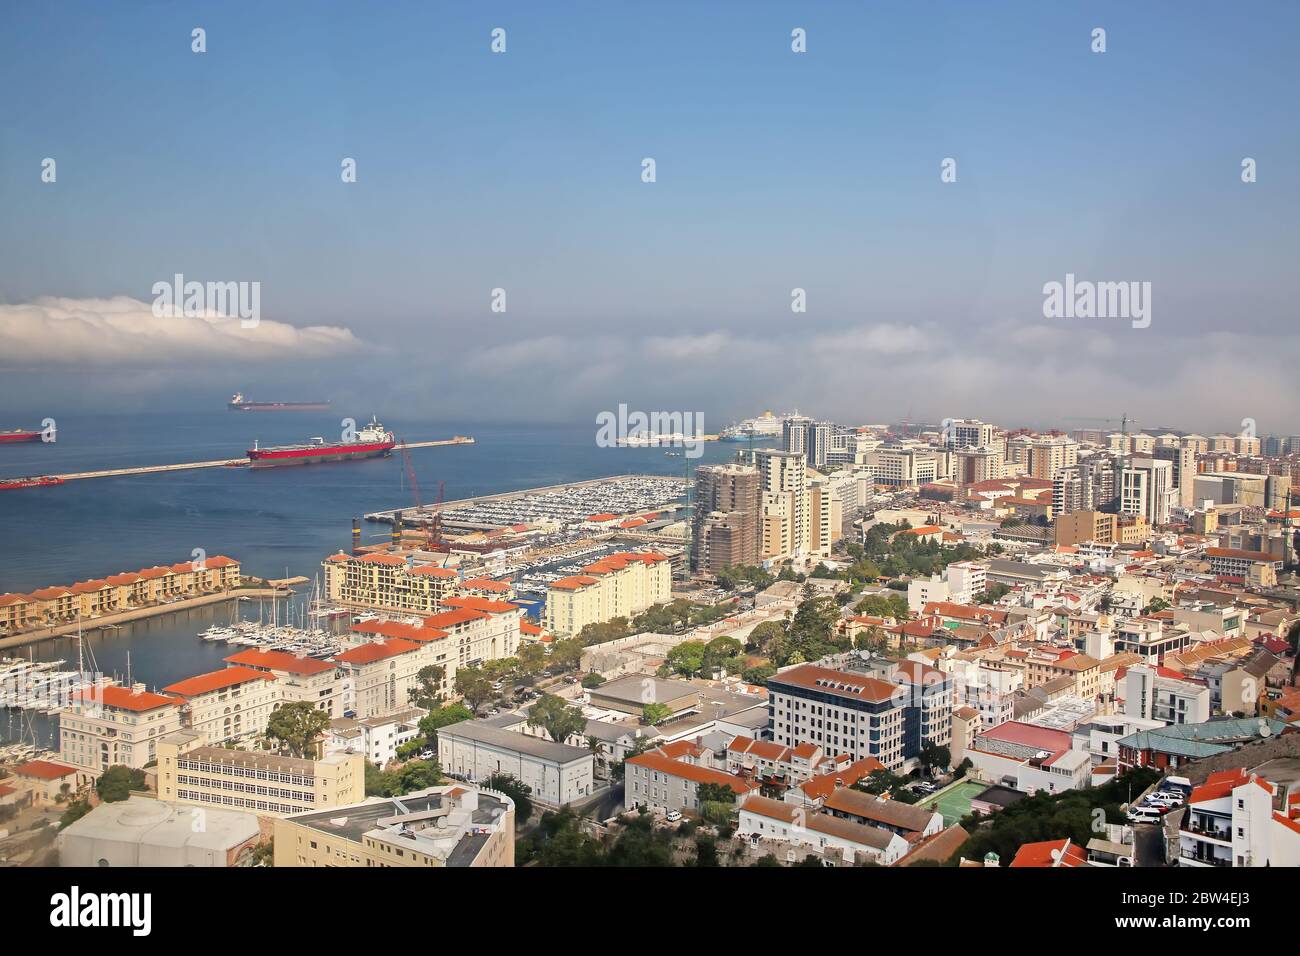 View from the Rock of the city below, the commercial port & also the coast of Africa in the far distance, Gibraltar. Stock Photo